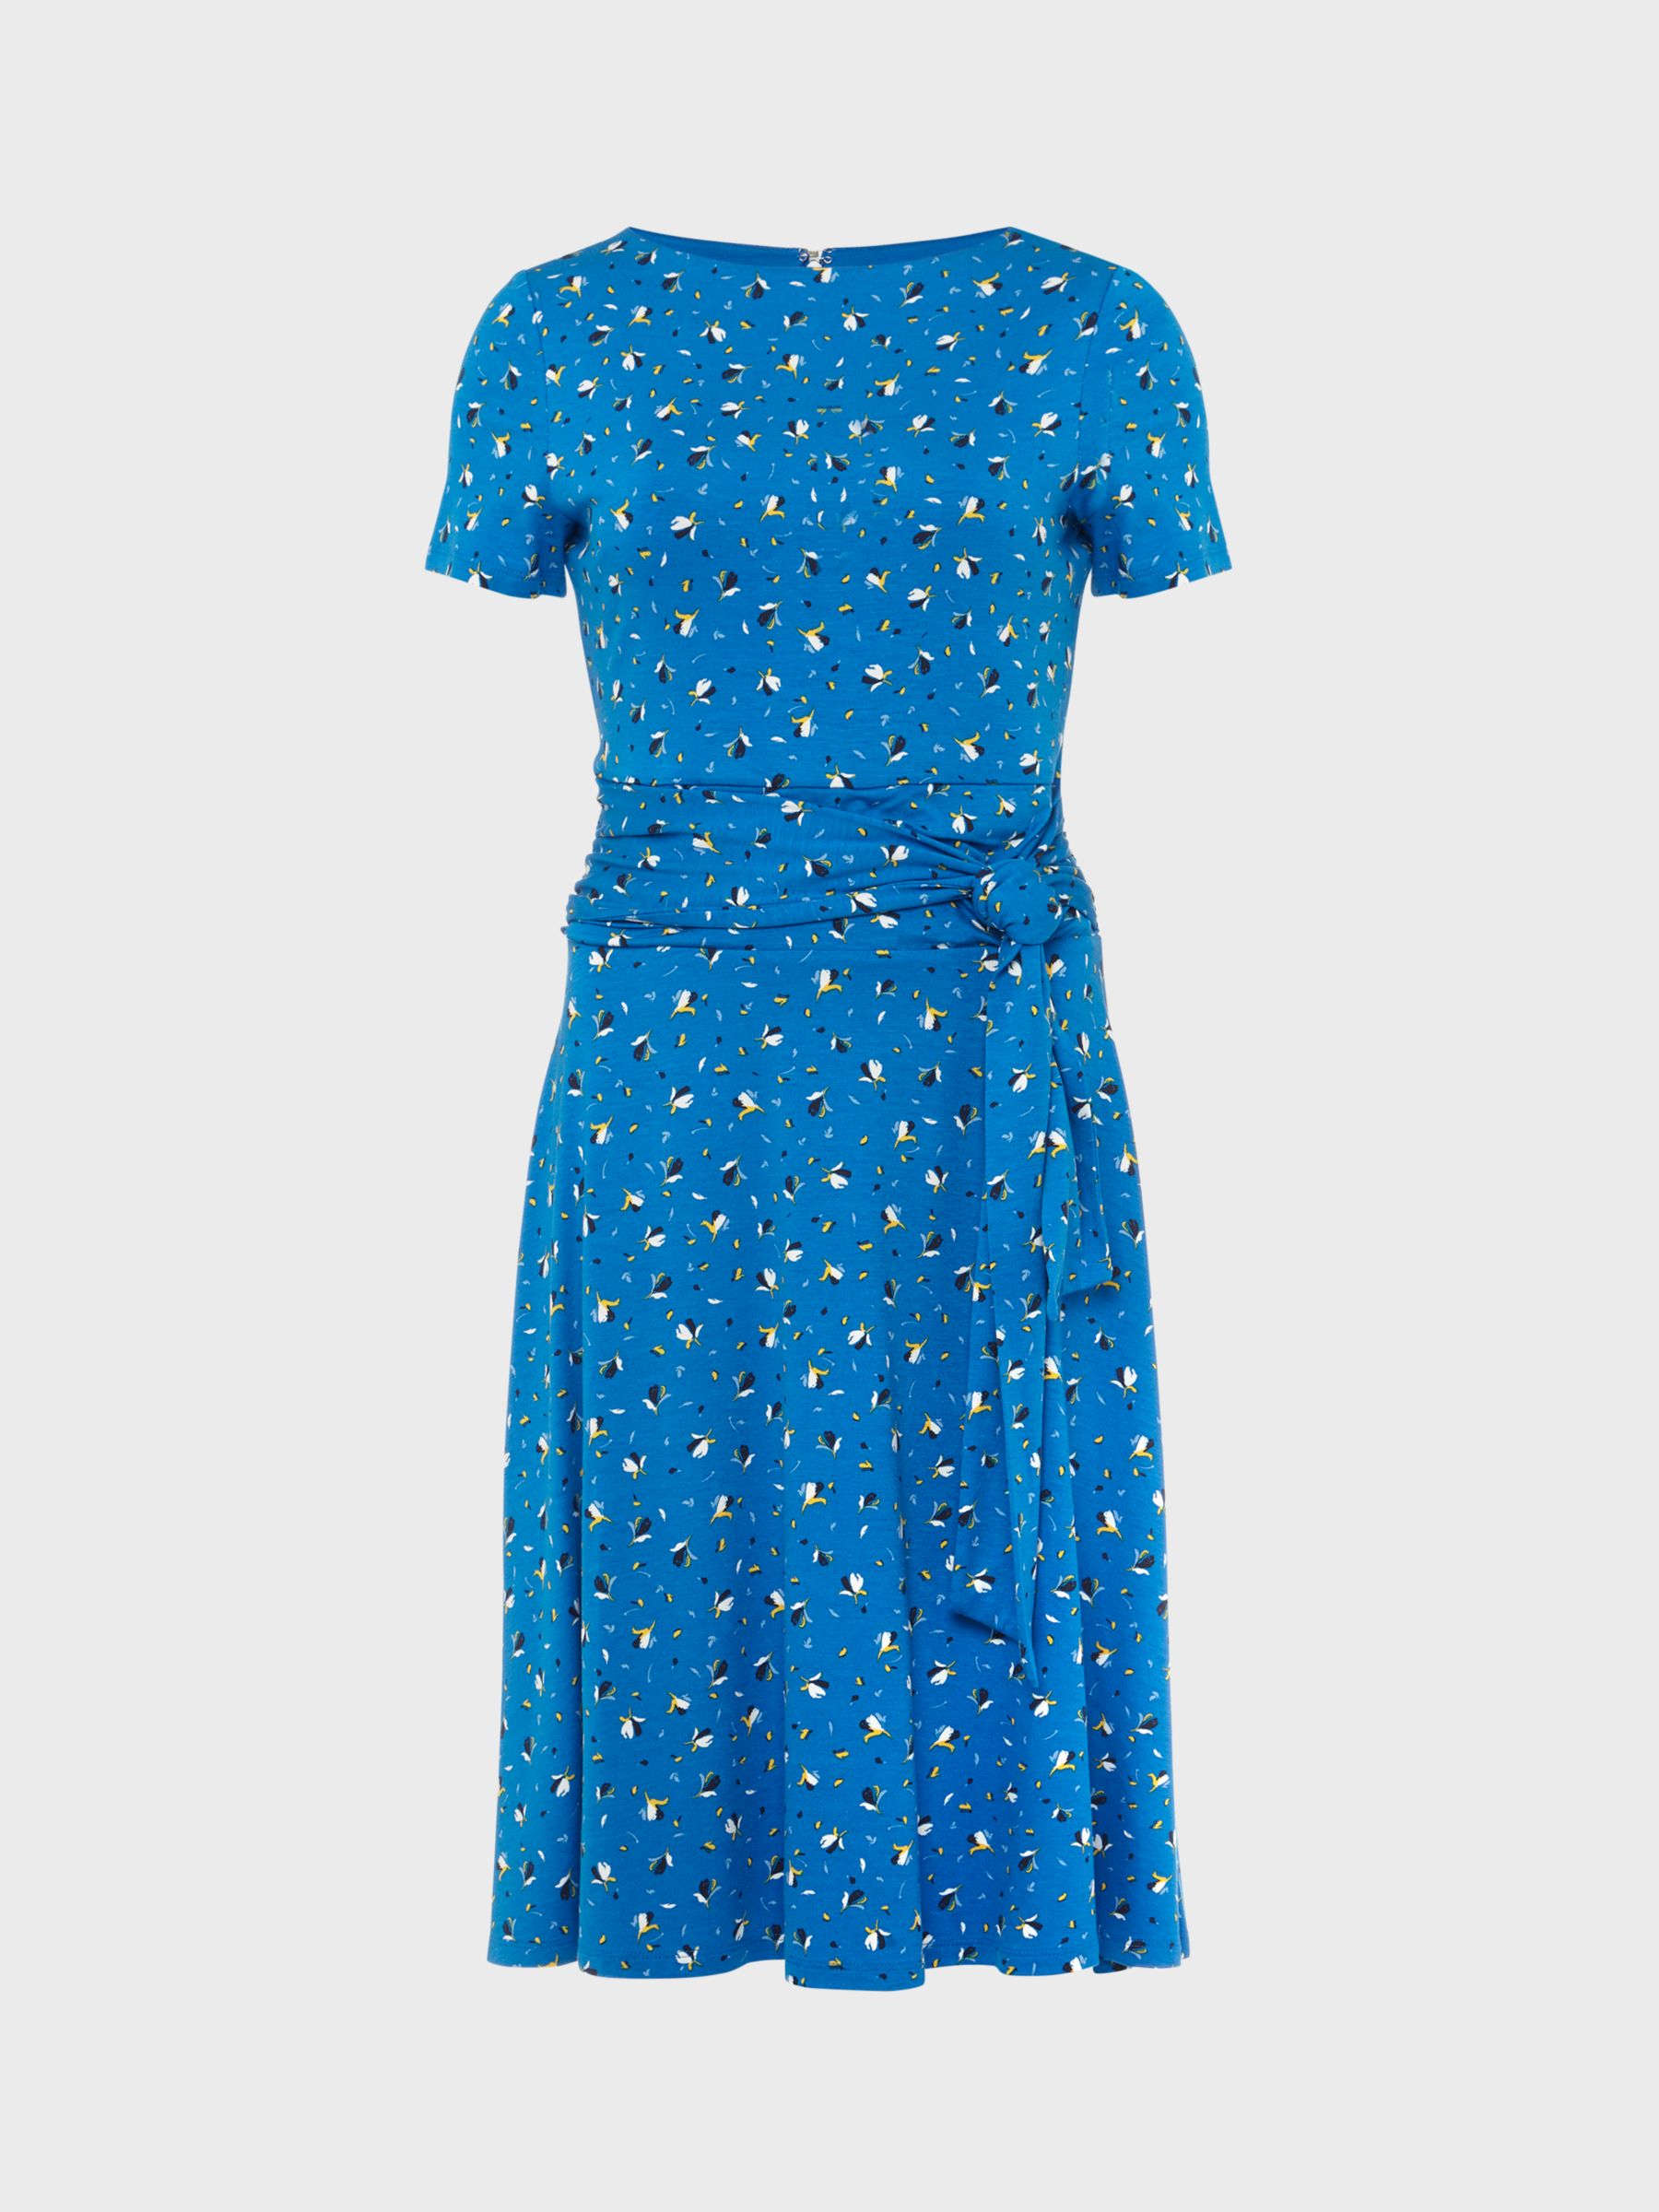 Hobbs Kimmy Abstract Print Dress, Imperial/Multi at John Lewis & Partners